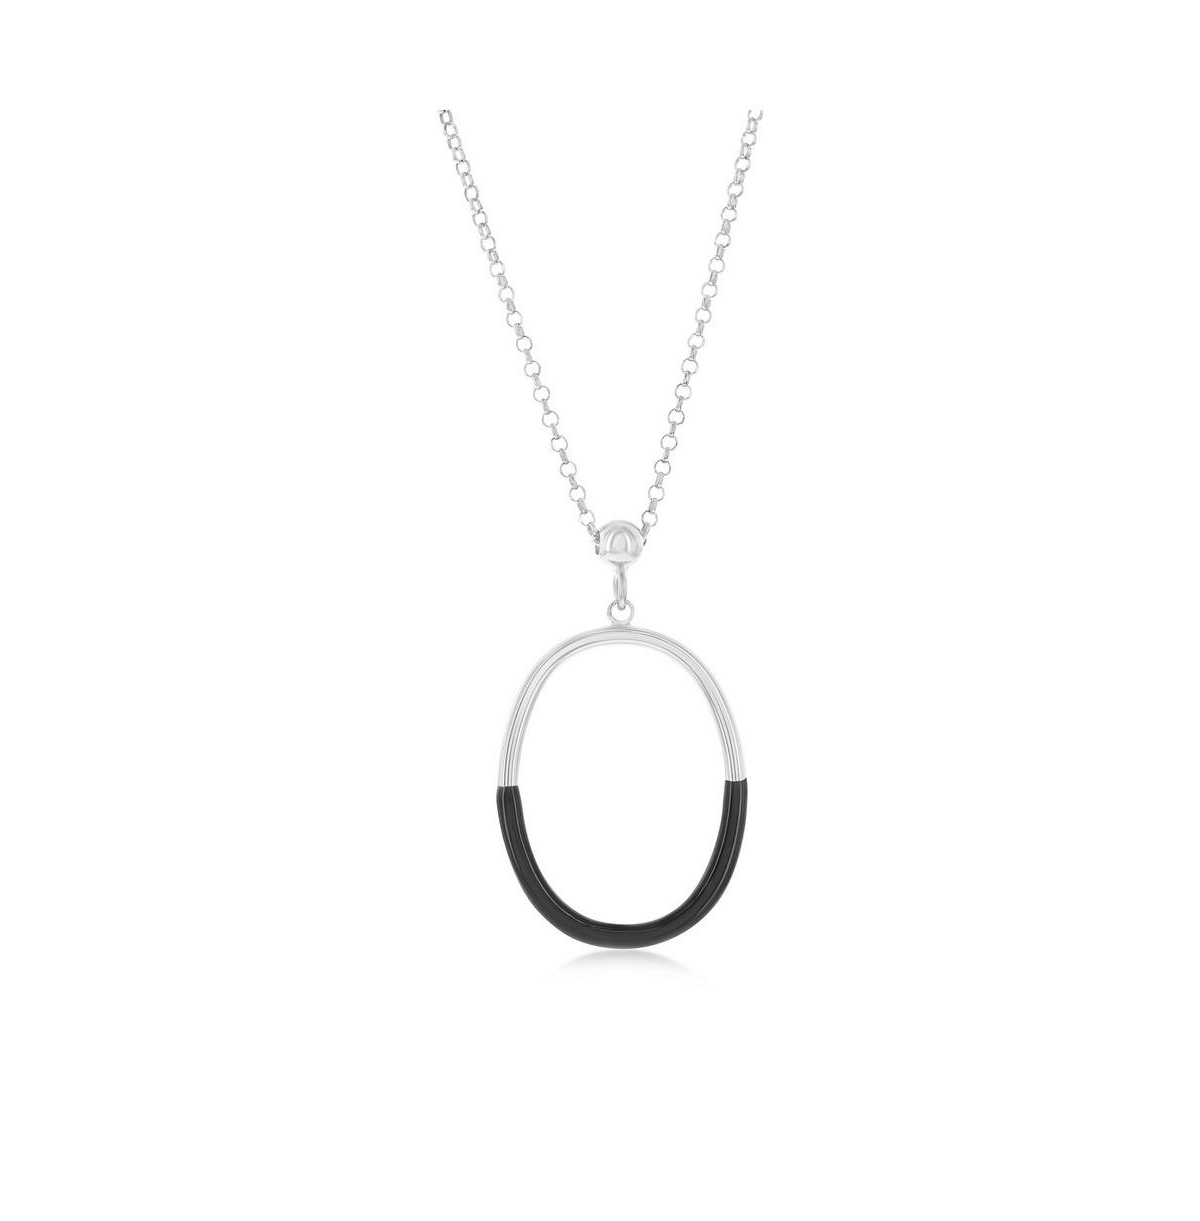 Sterling Silver or Gold Plated over sterling silver, Enamel Oval Necklace - Black